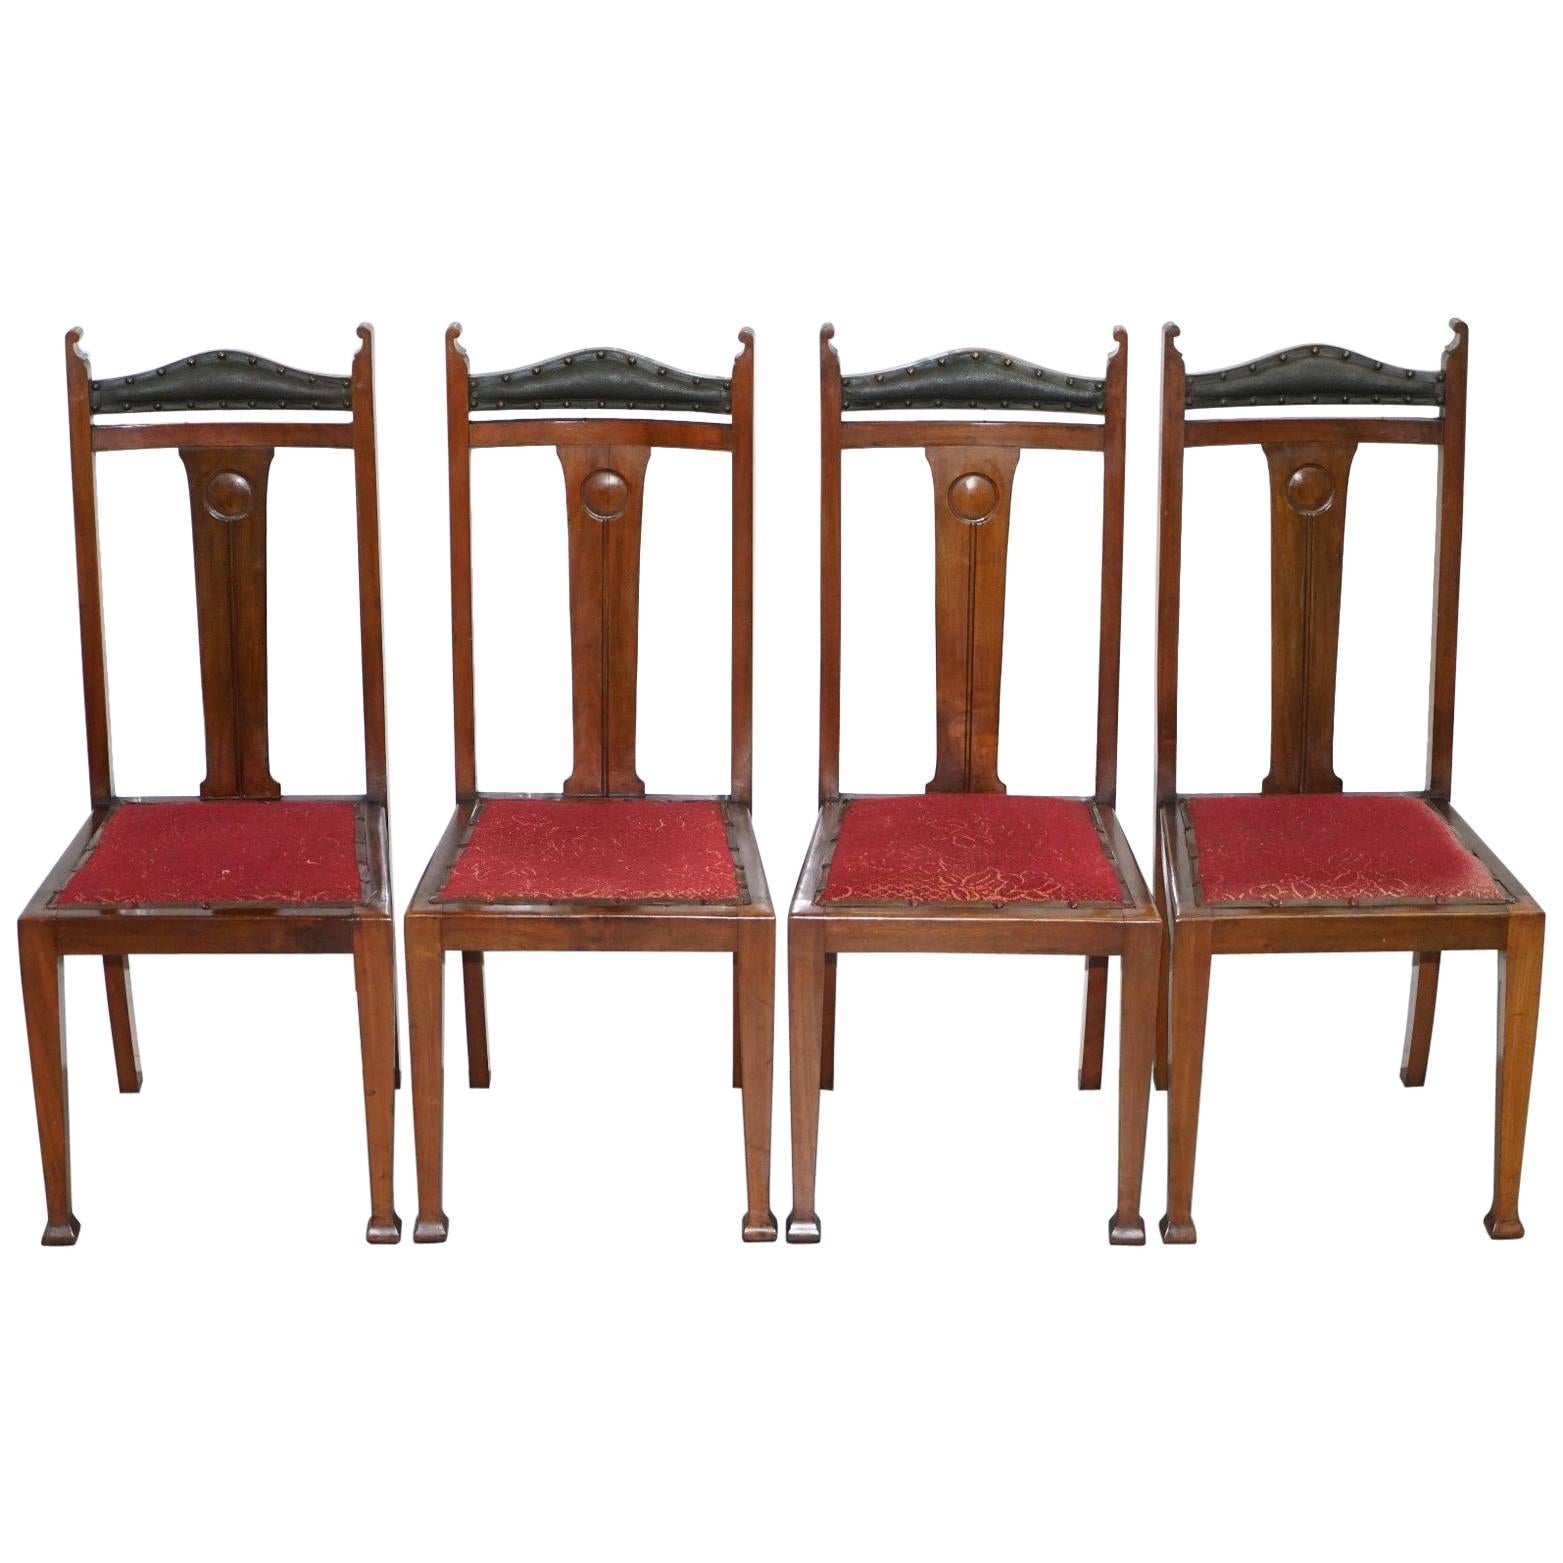 Set of Four Liberty's London Arts & Crafts Dining Room Chairs Archibald Knox